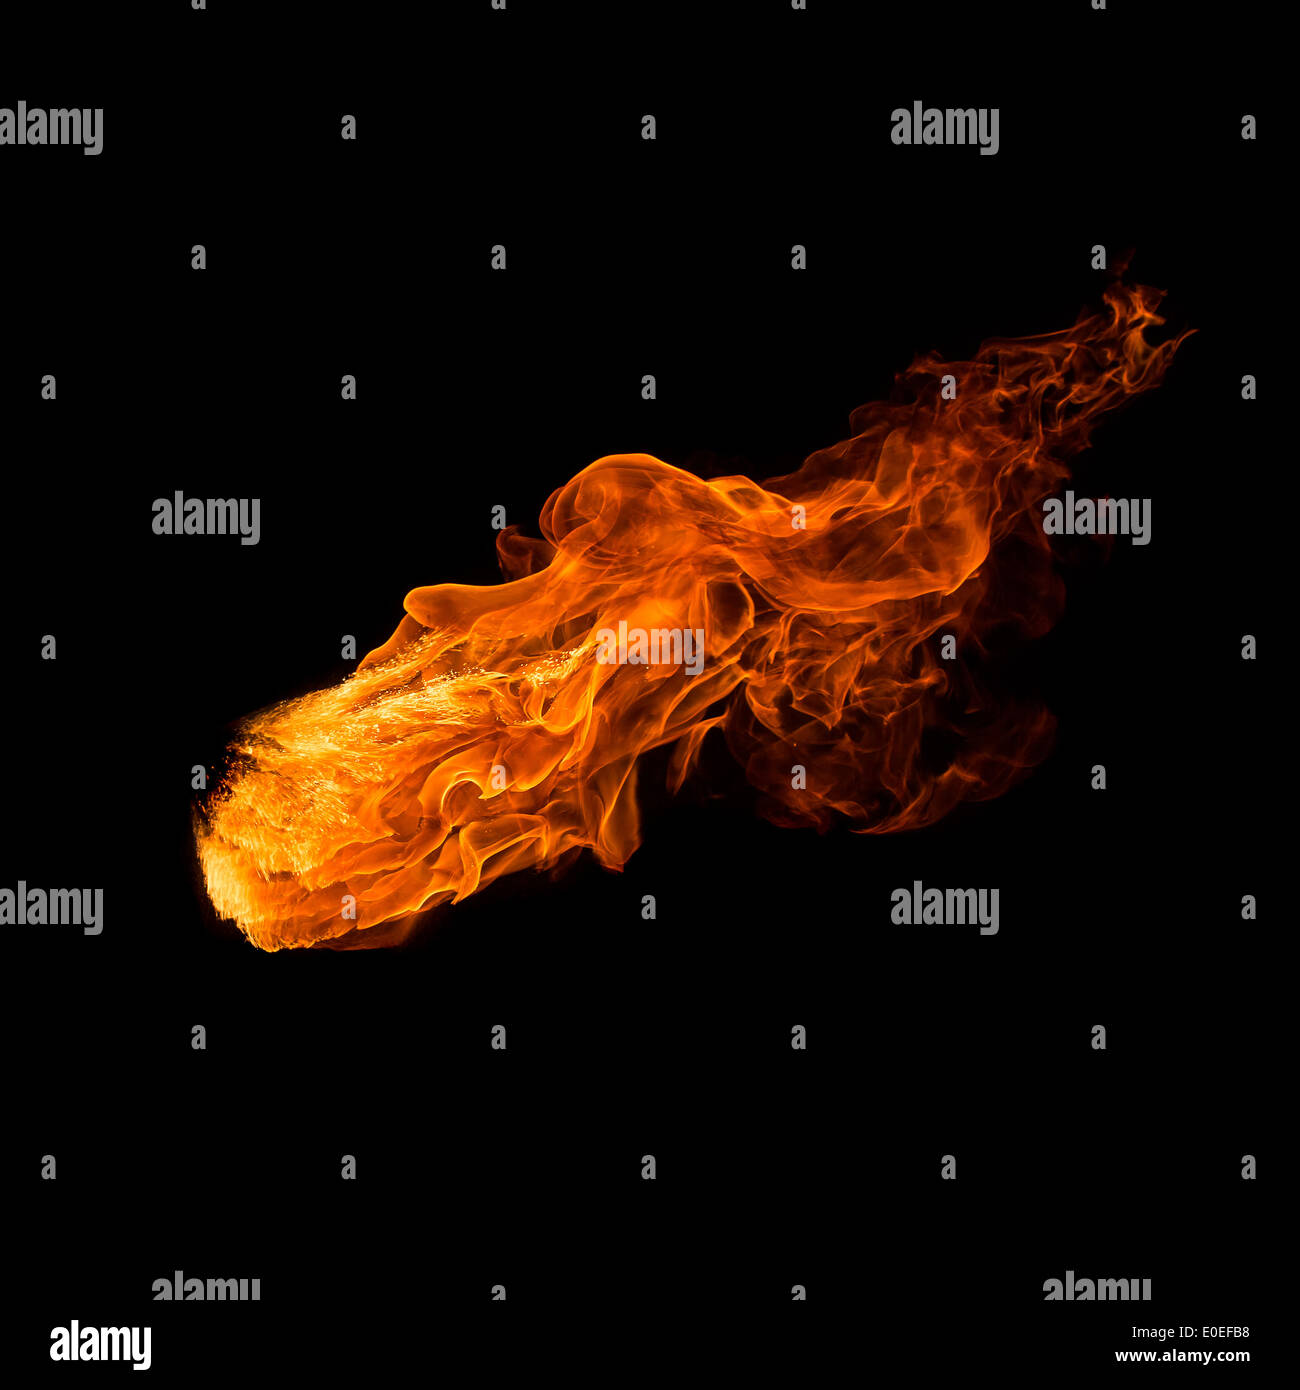 Fire isolated on black background. Stock Photo